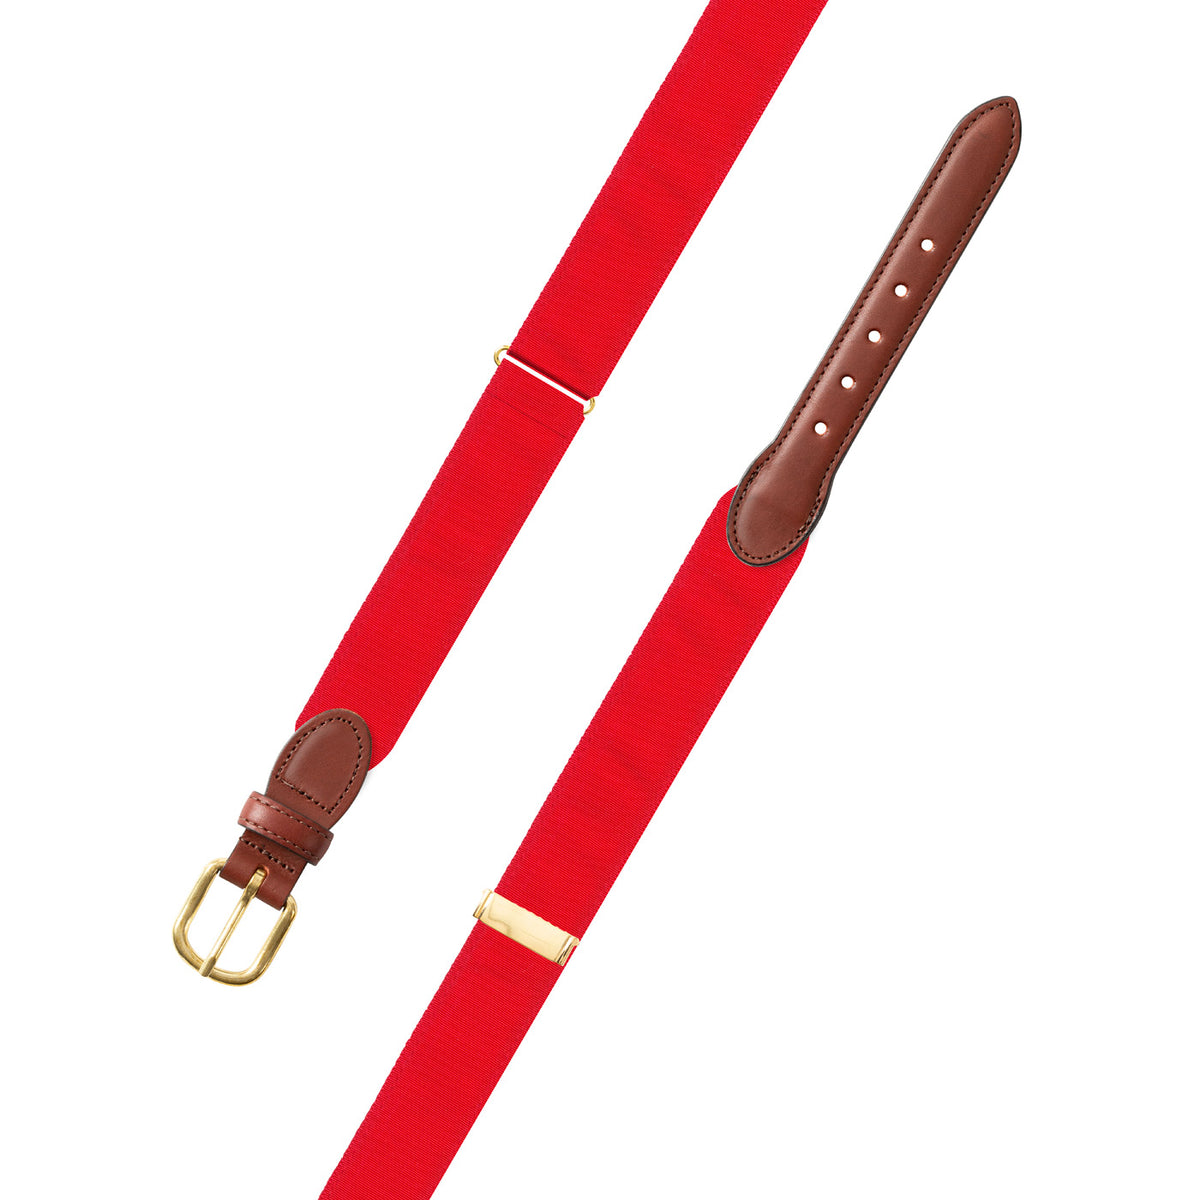 Adjustable Red Grosgrain Belt with Brown Leather Tabs